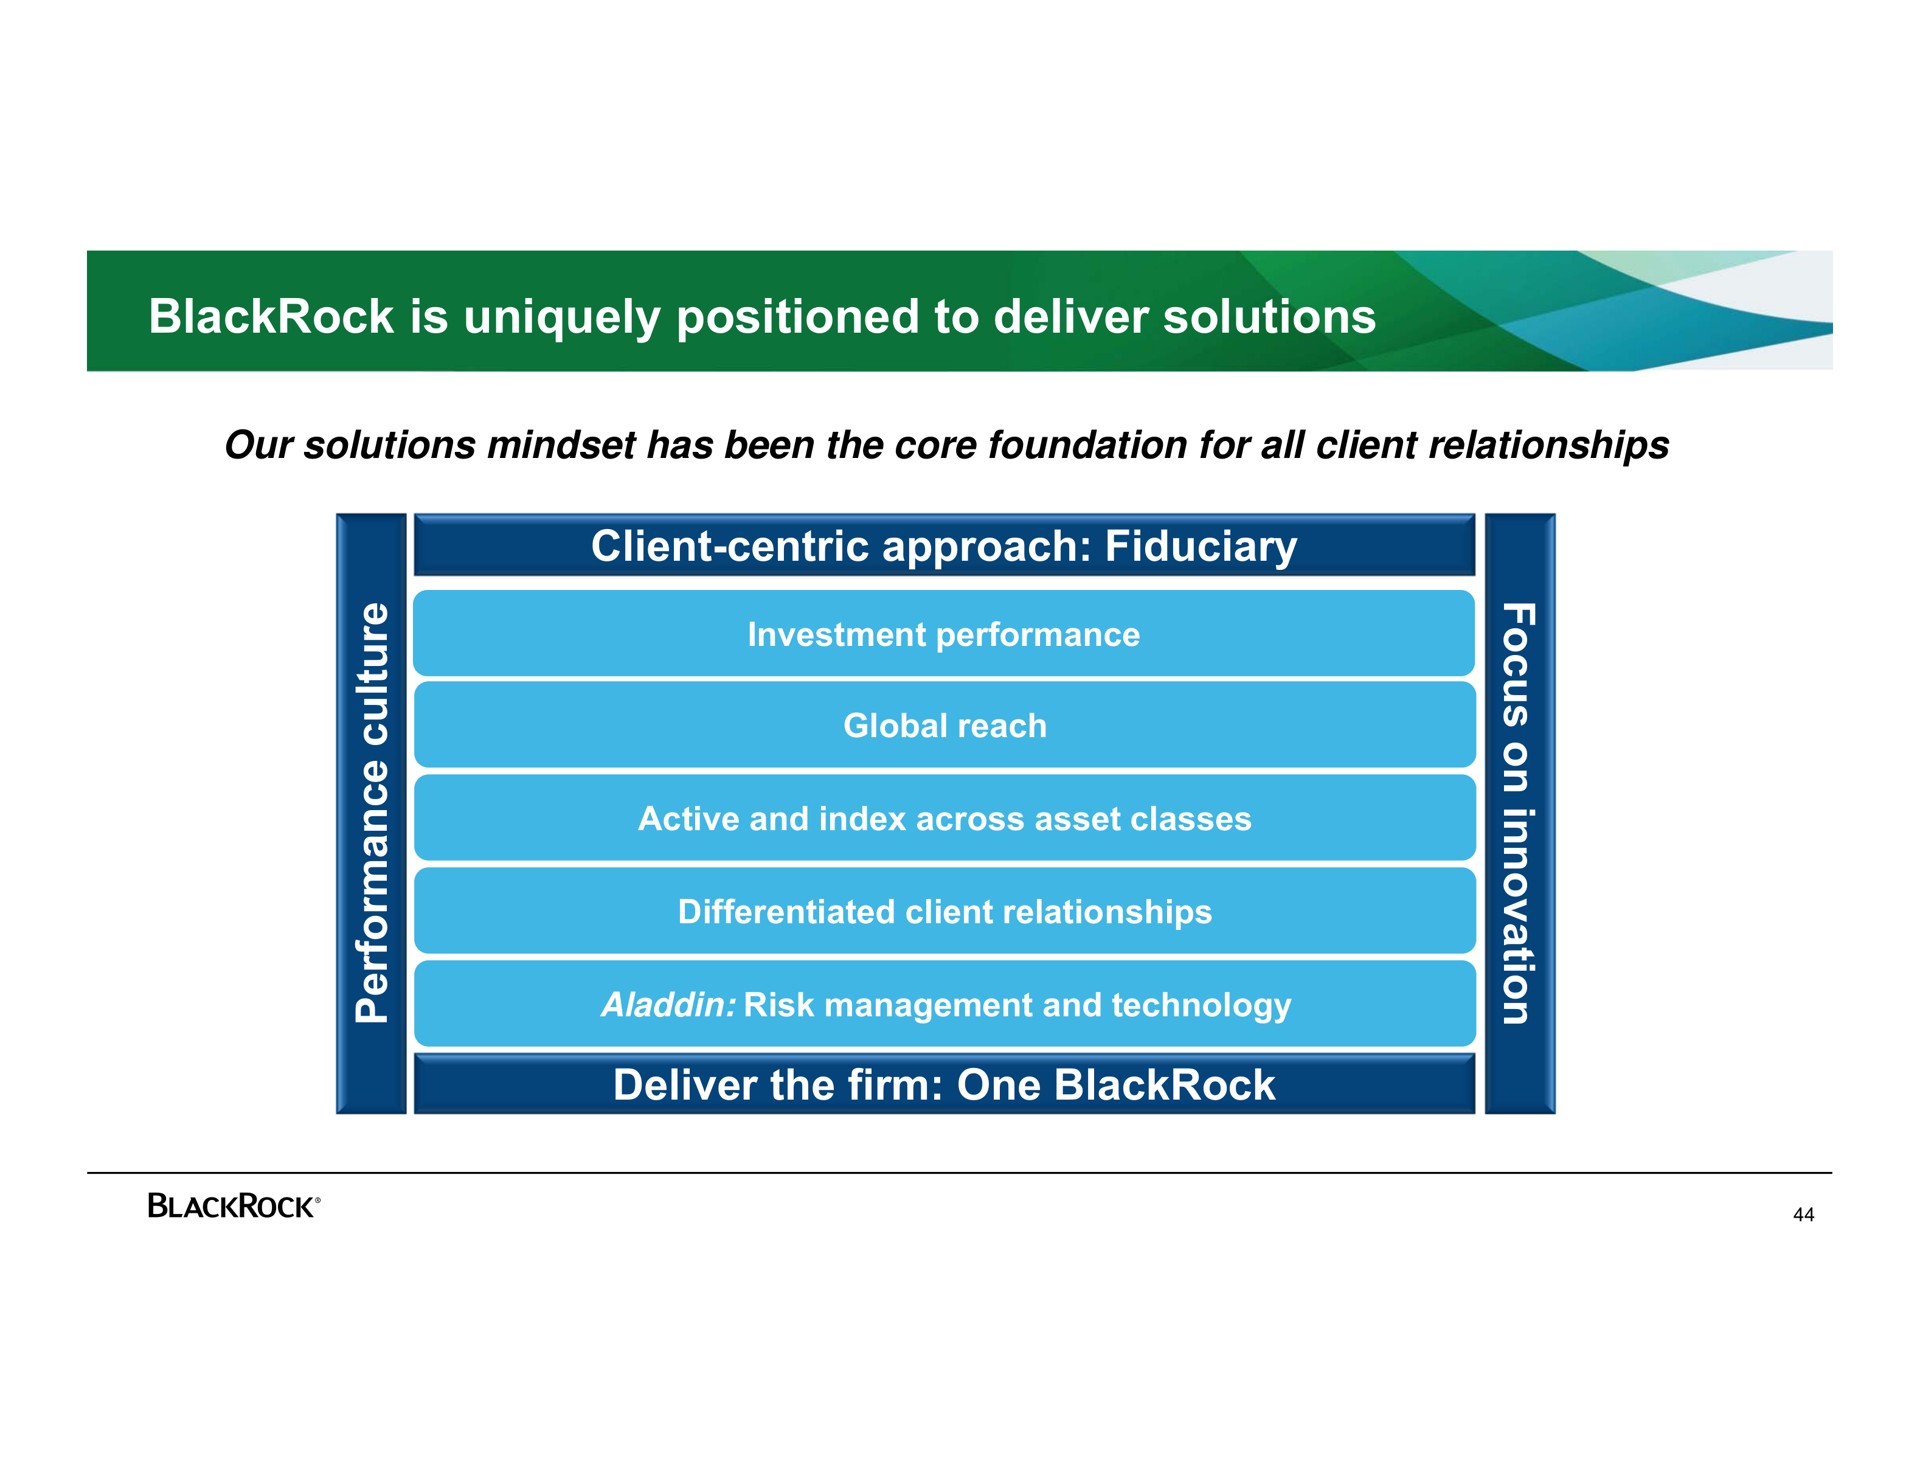 is uniquely positioned to deliver solutions client centric approach fiduciary deliver the firm one | BlackRock